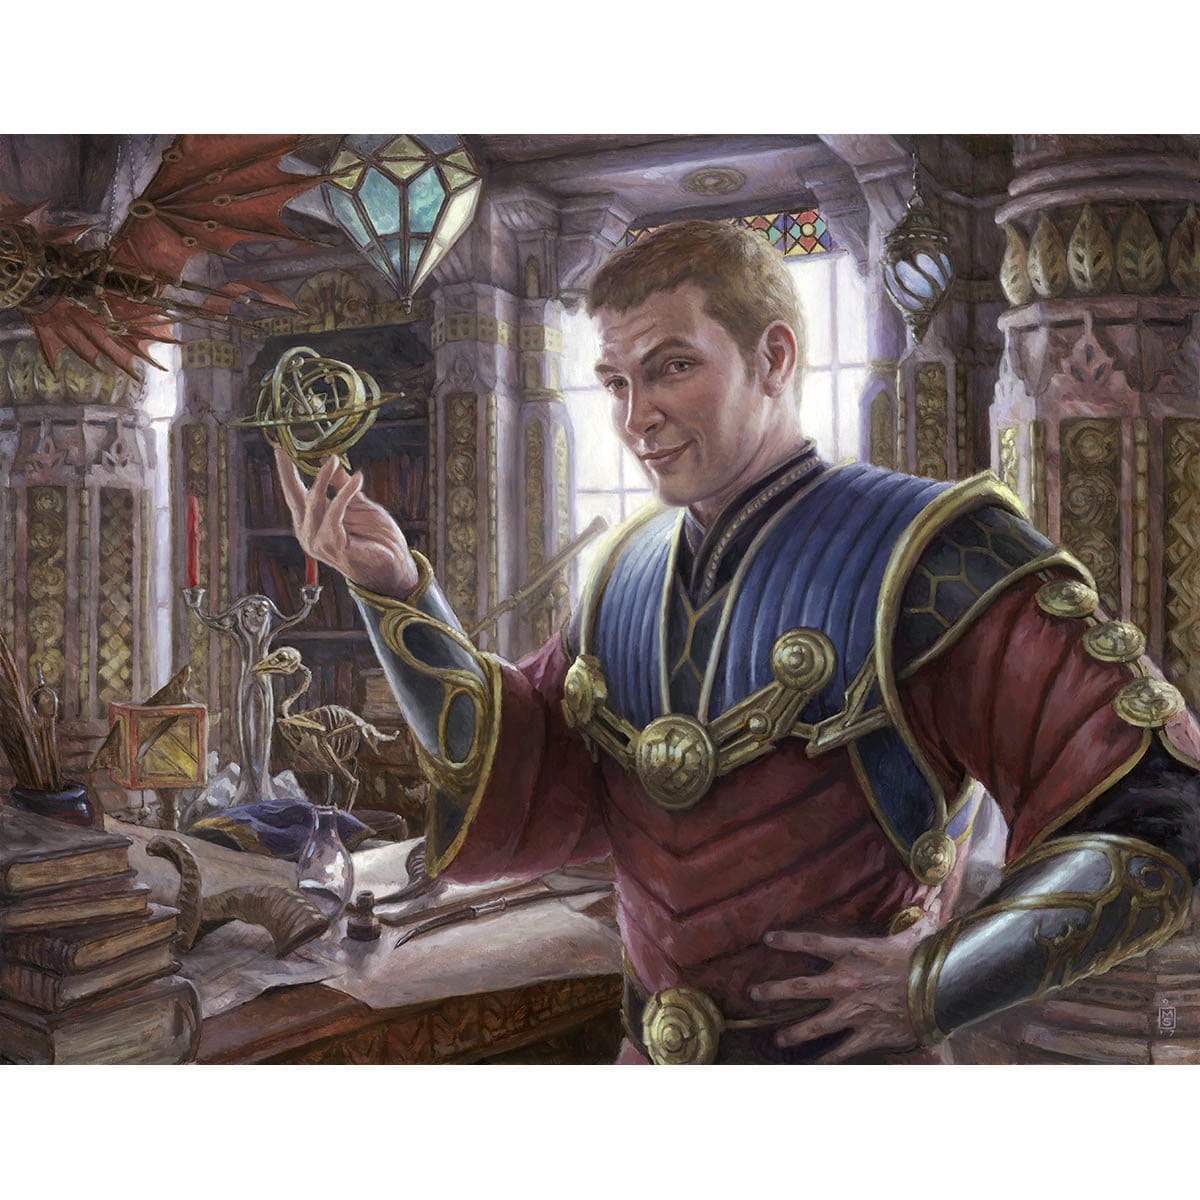 Tawnos, Urza's Apprentice Print - Print - Original Magic Art - Accessories for Magic the Gathering and other card games